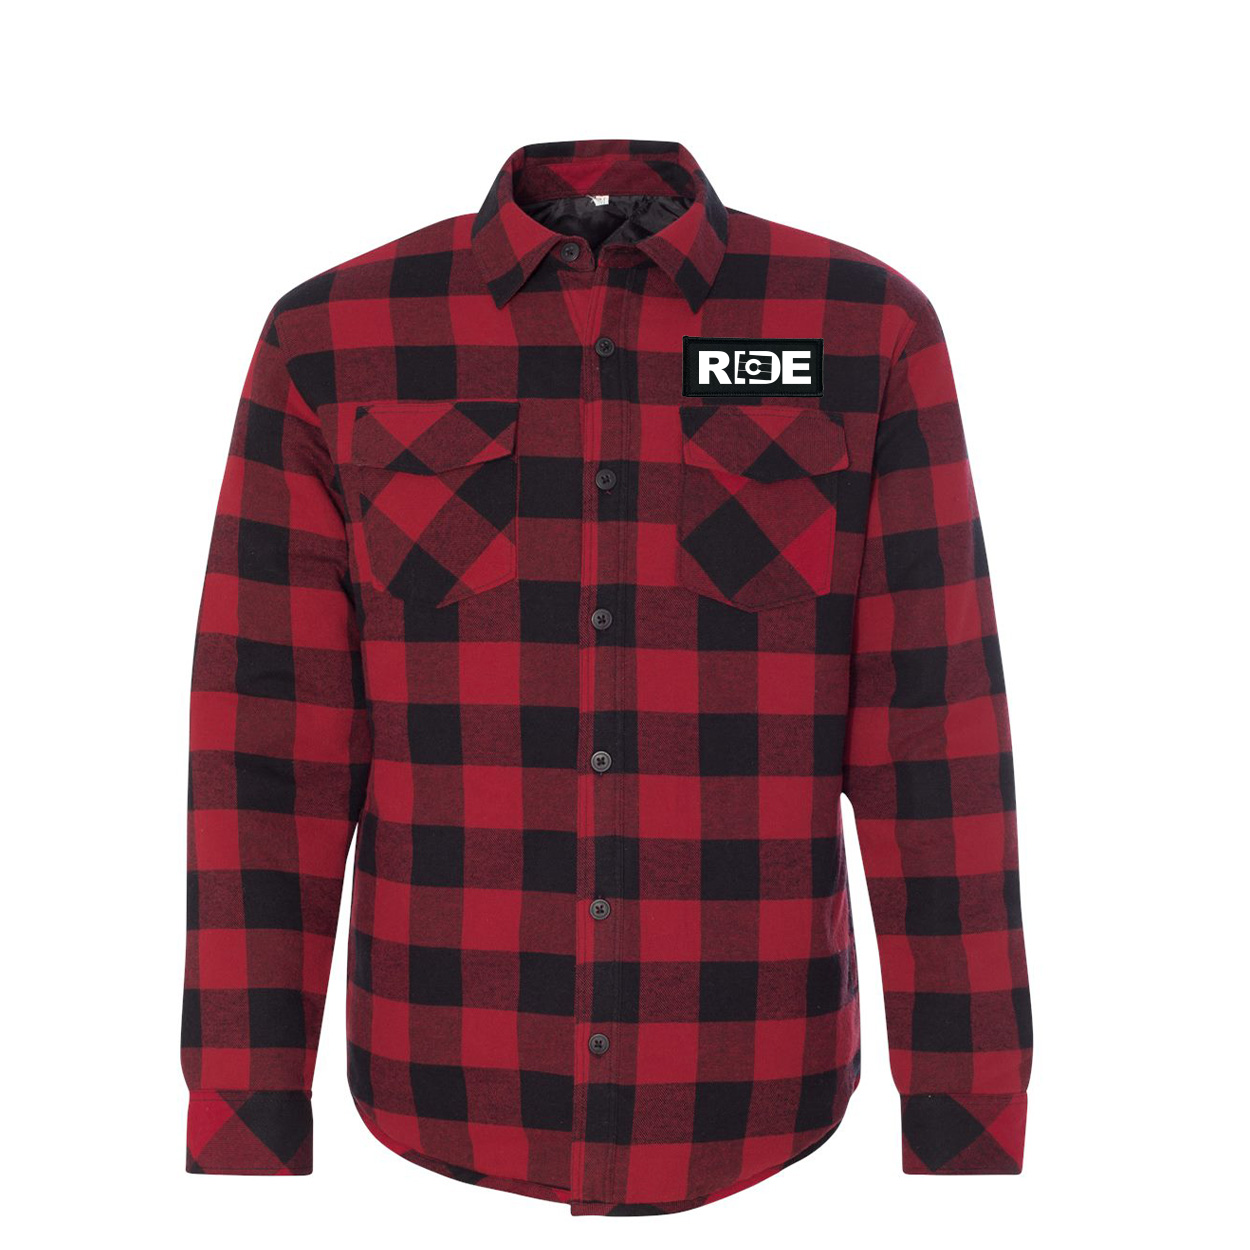 Ride Colorado Classic Unisex Woven Patch Quilted Button Flannel Jacket Red/Black Buffalo (White Logo)